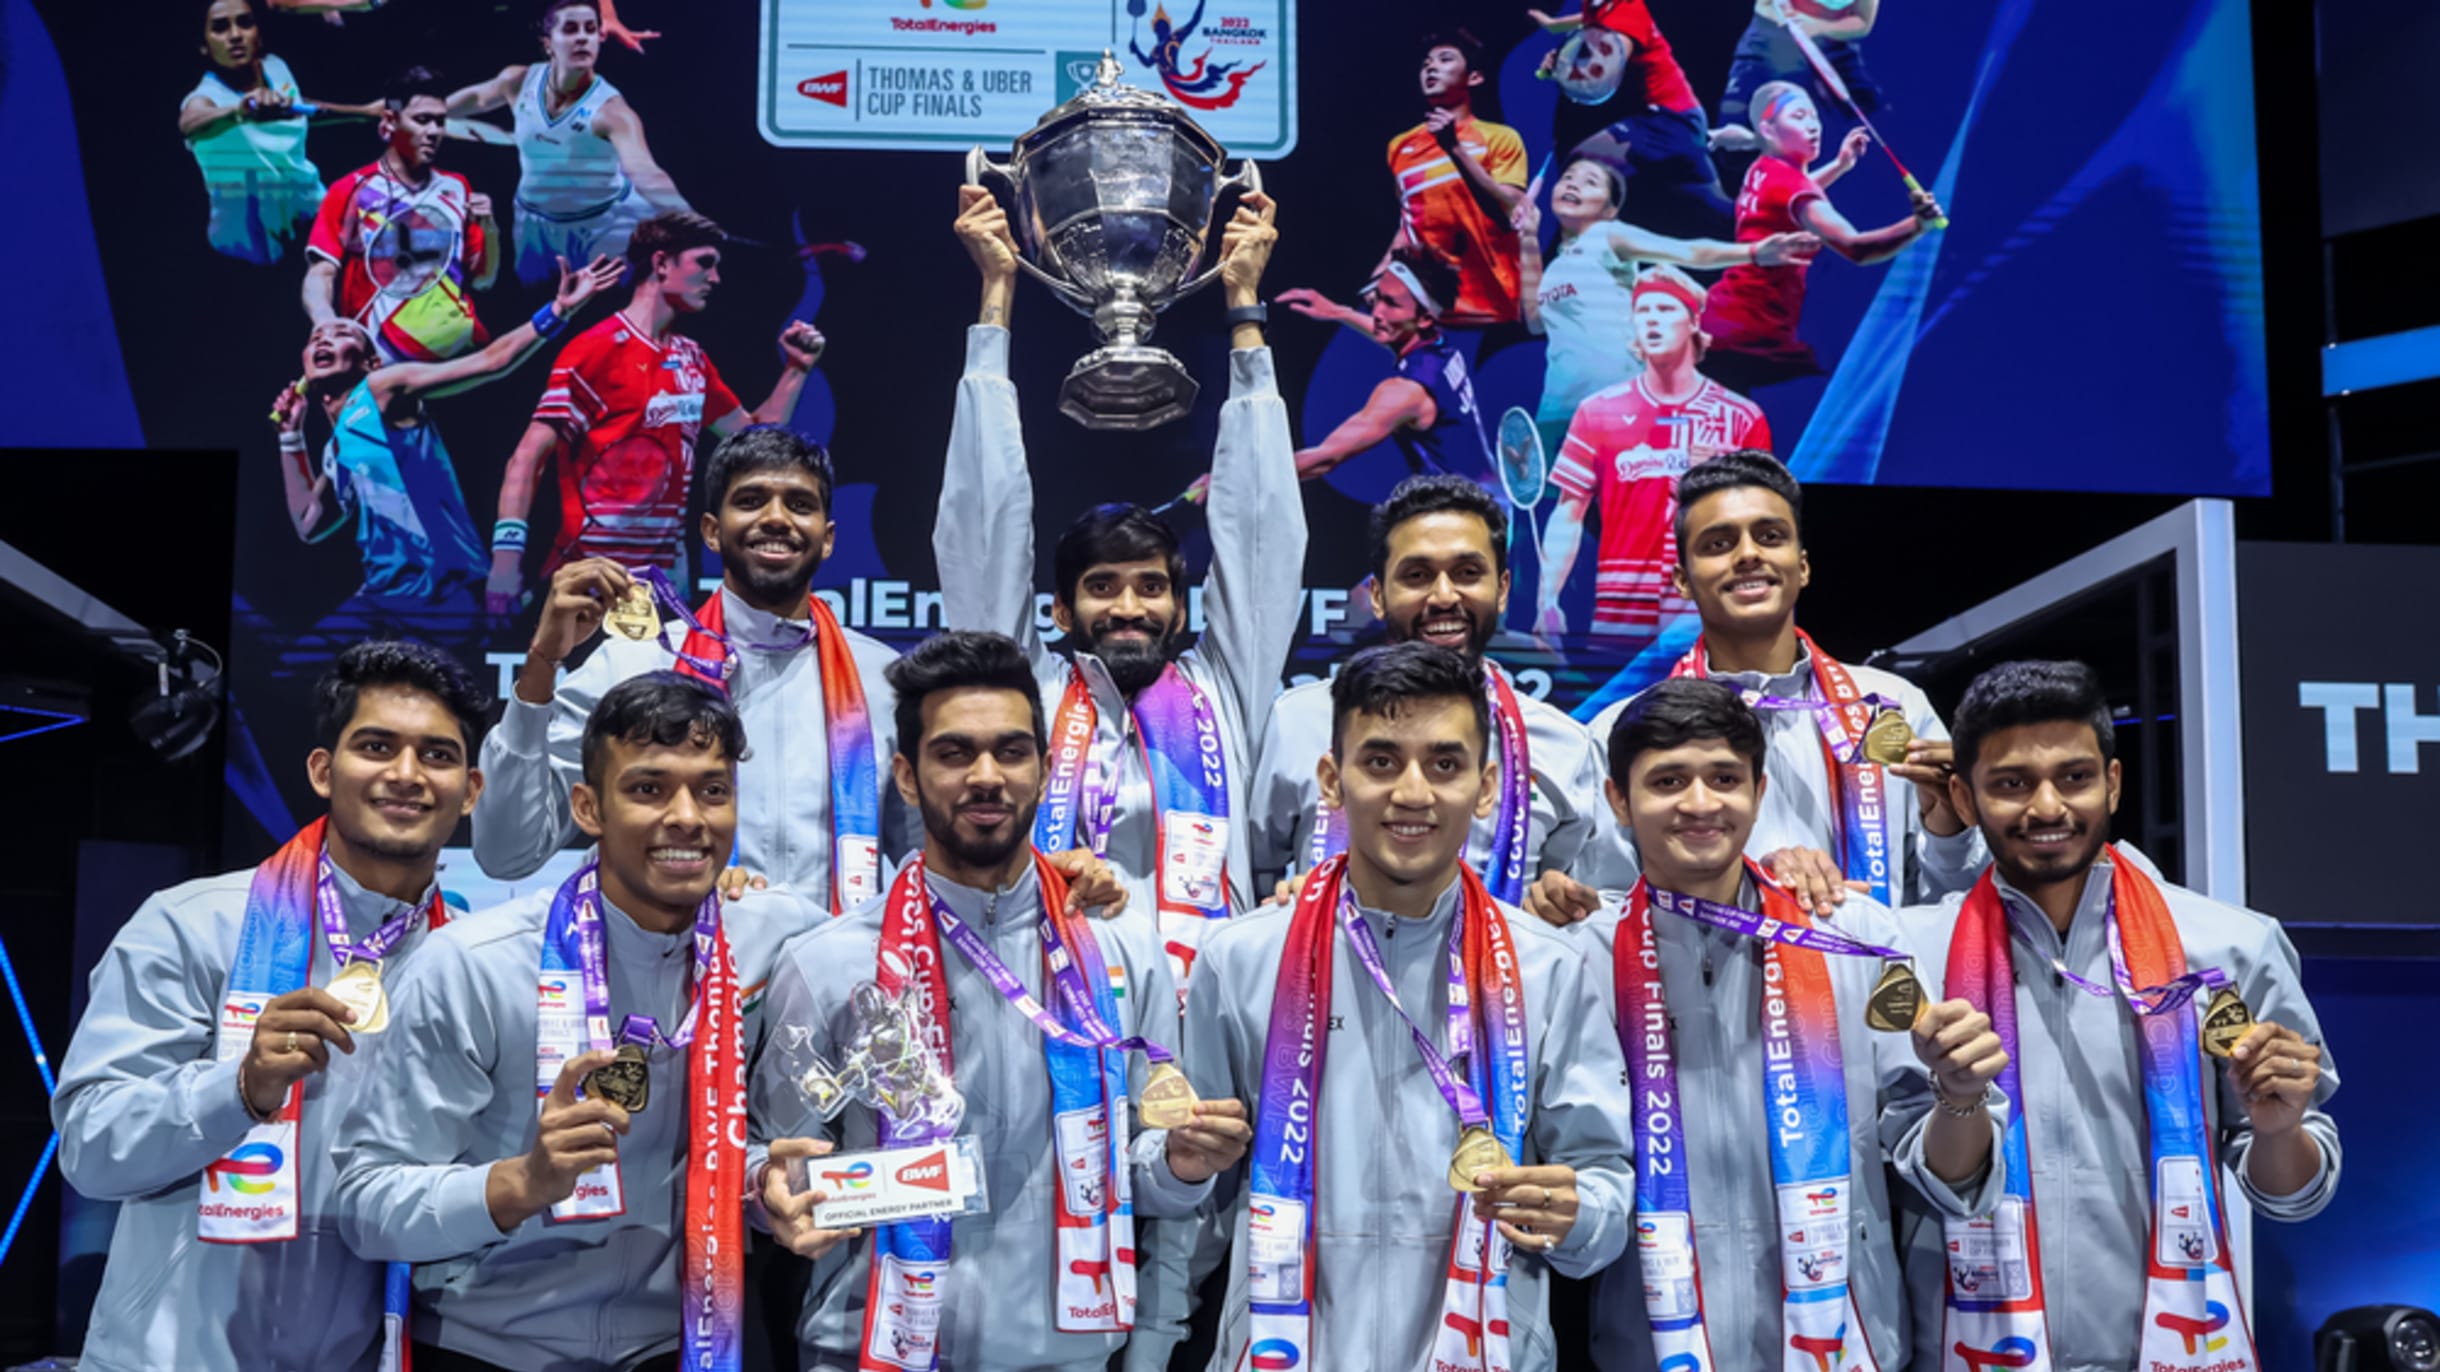 uber and thomas cup 2022 live